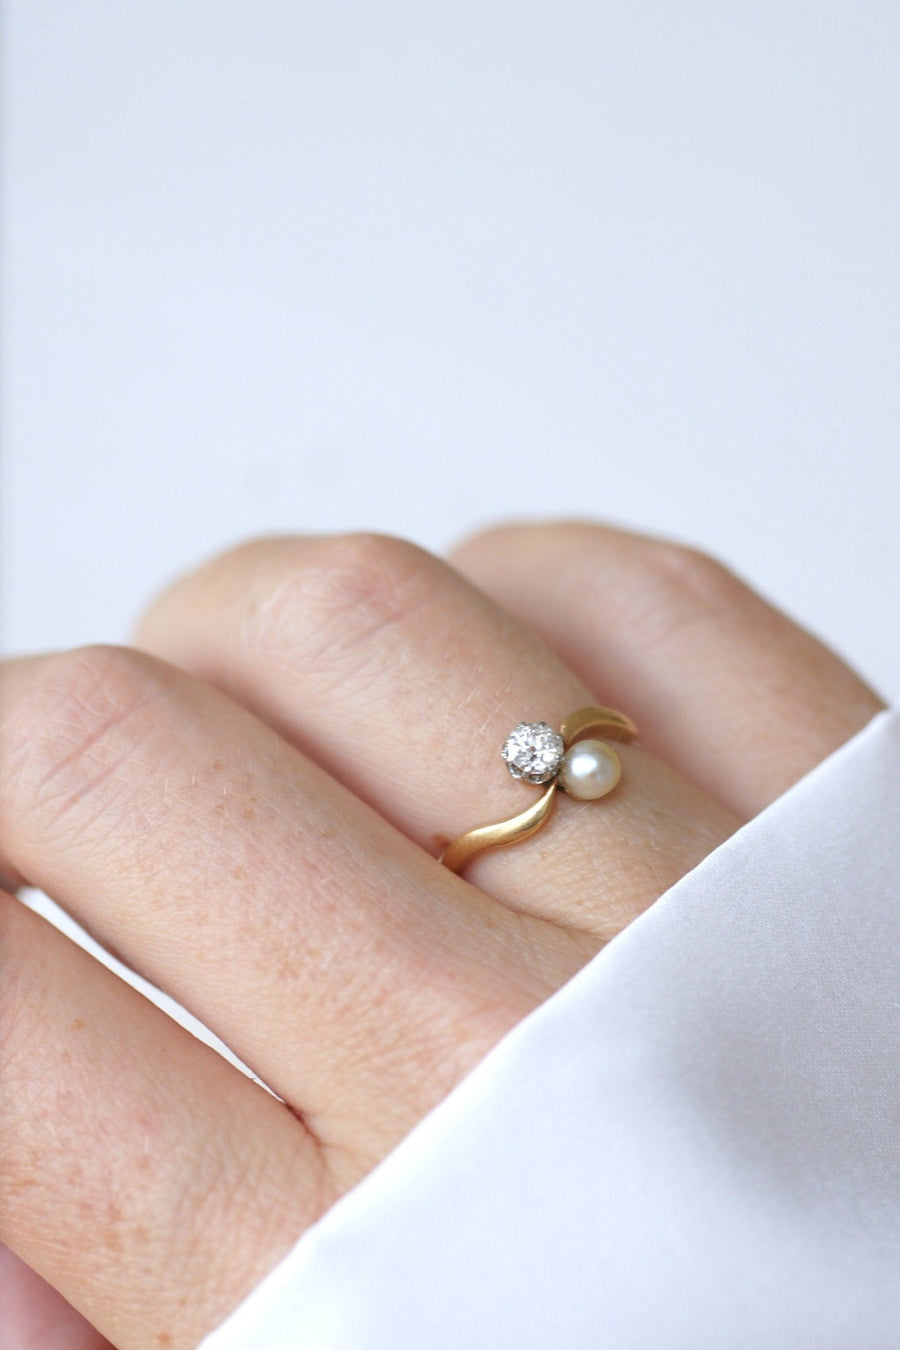 You and Me pearl and diamond ring - Penelope Gallery